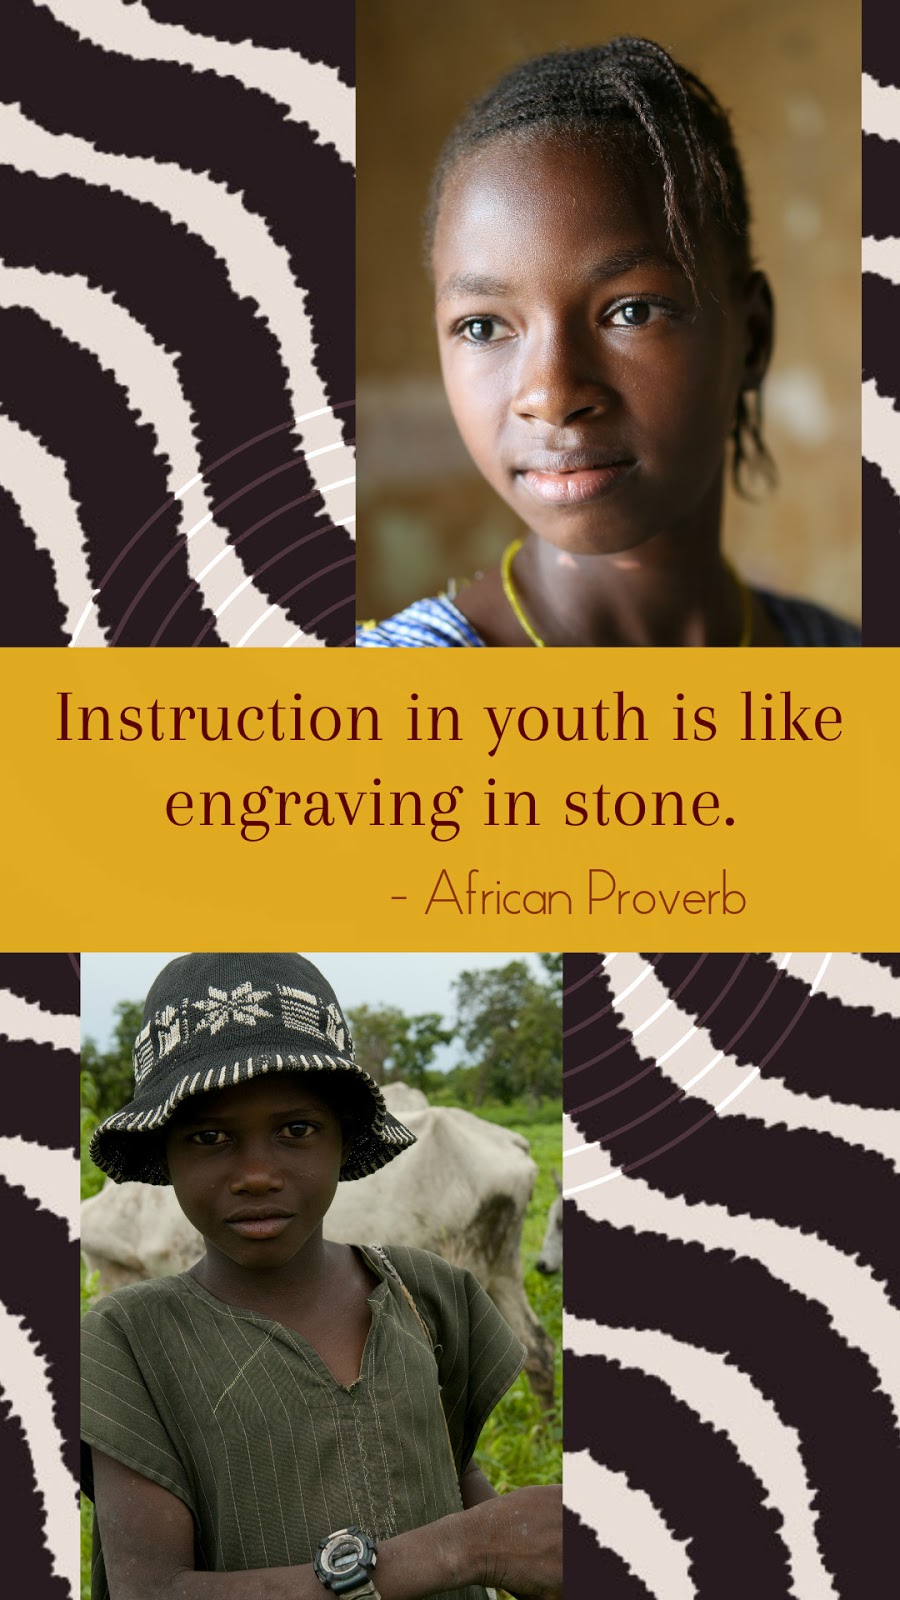 essay on instruction in youth is like engraving in stone